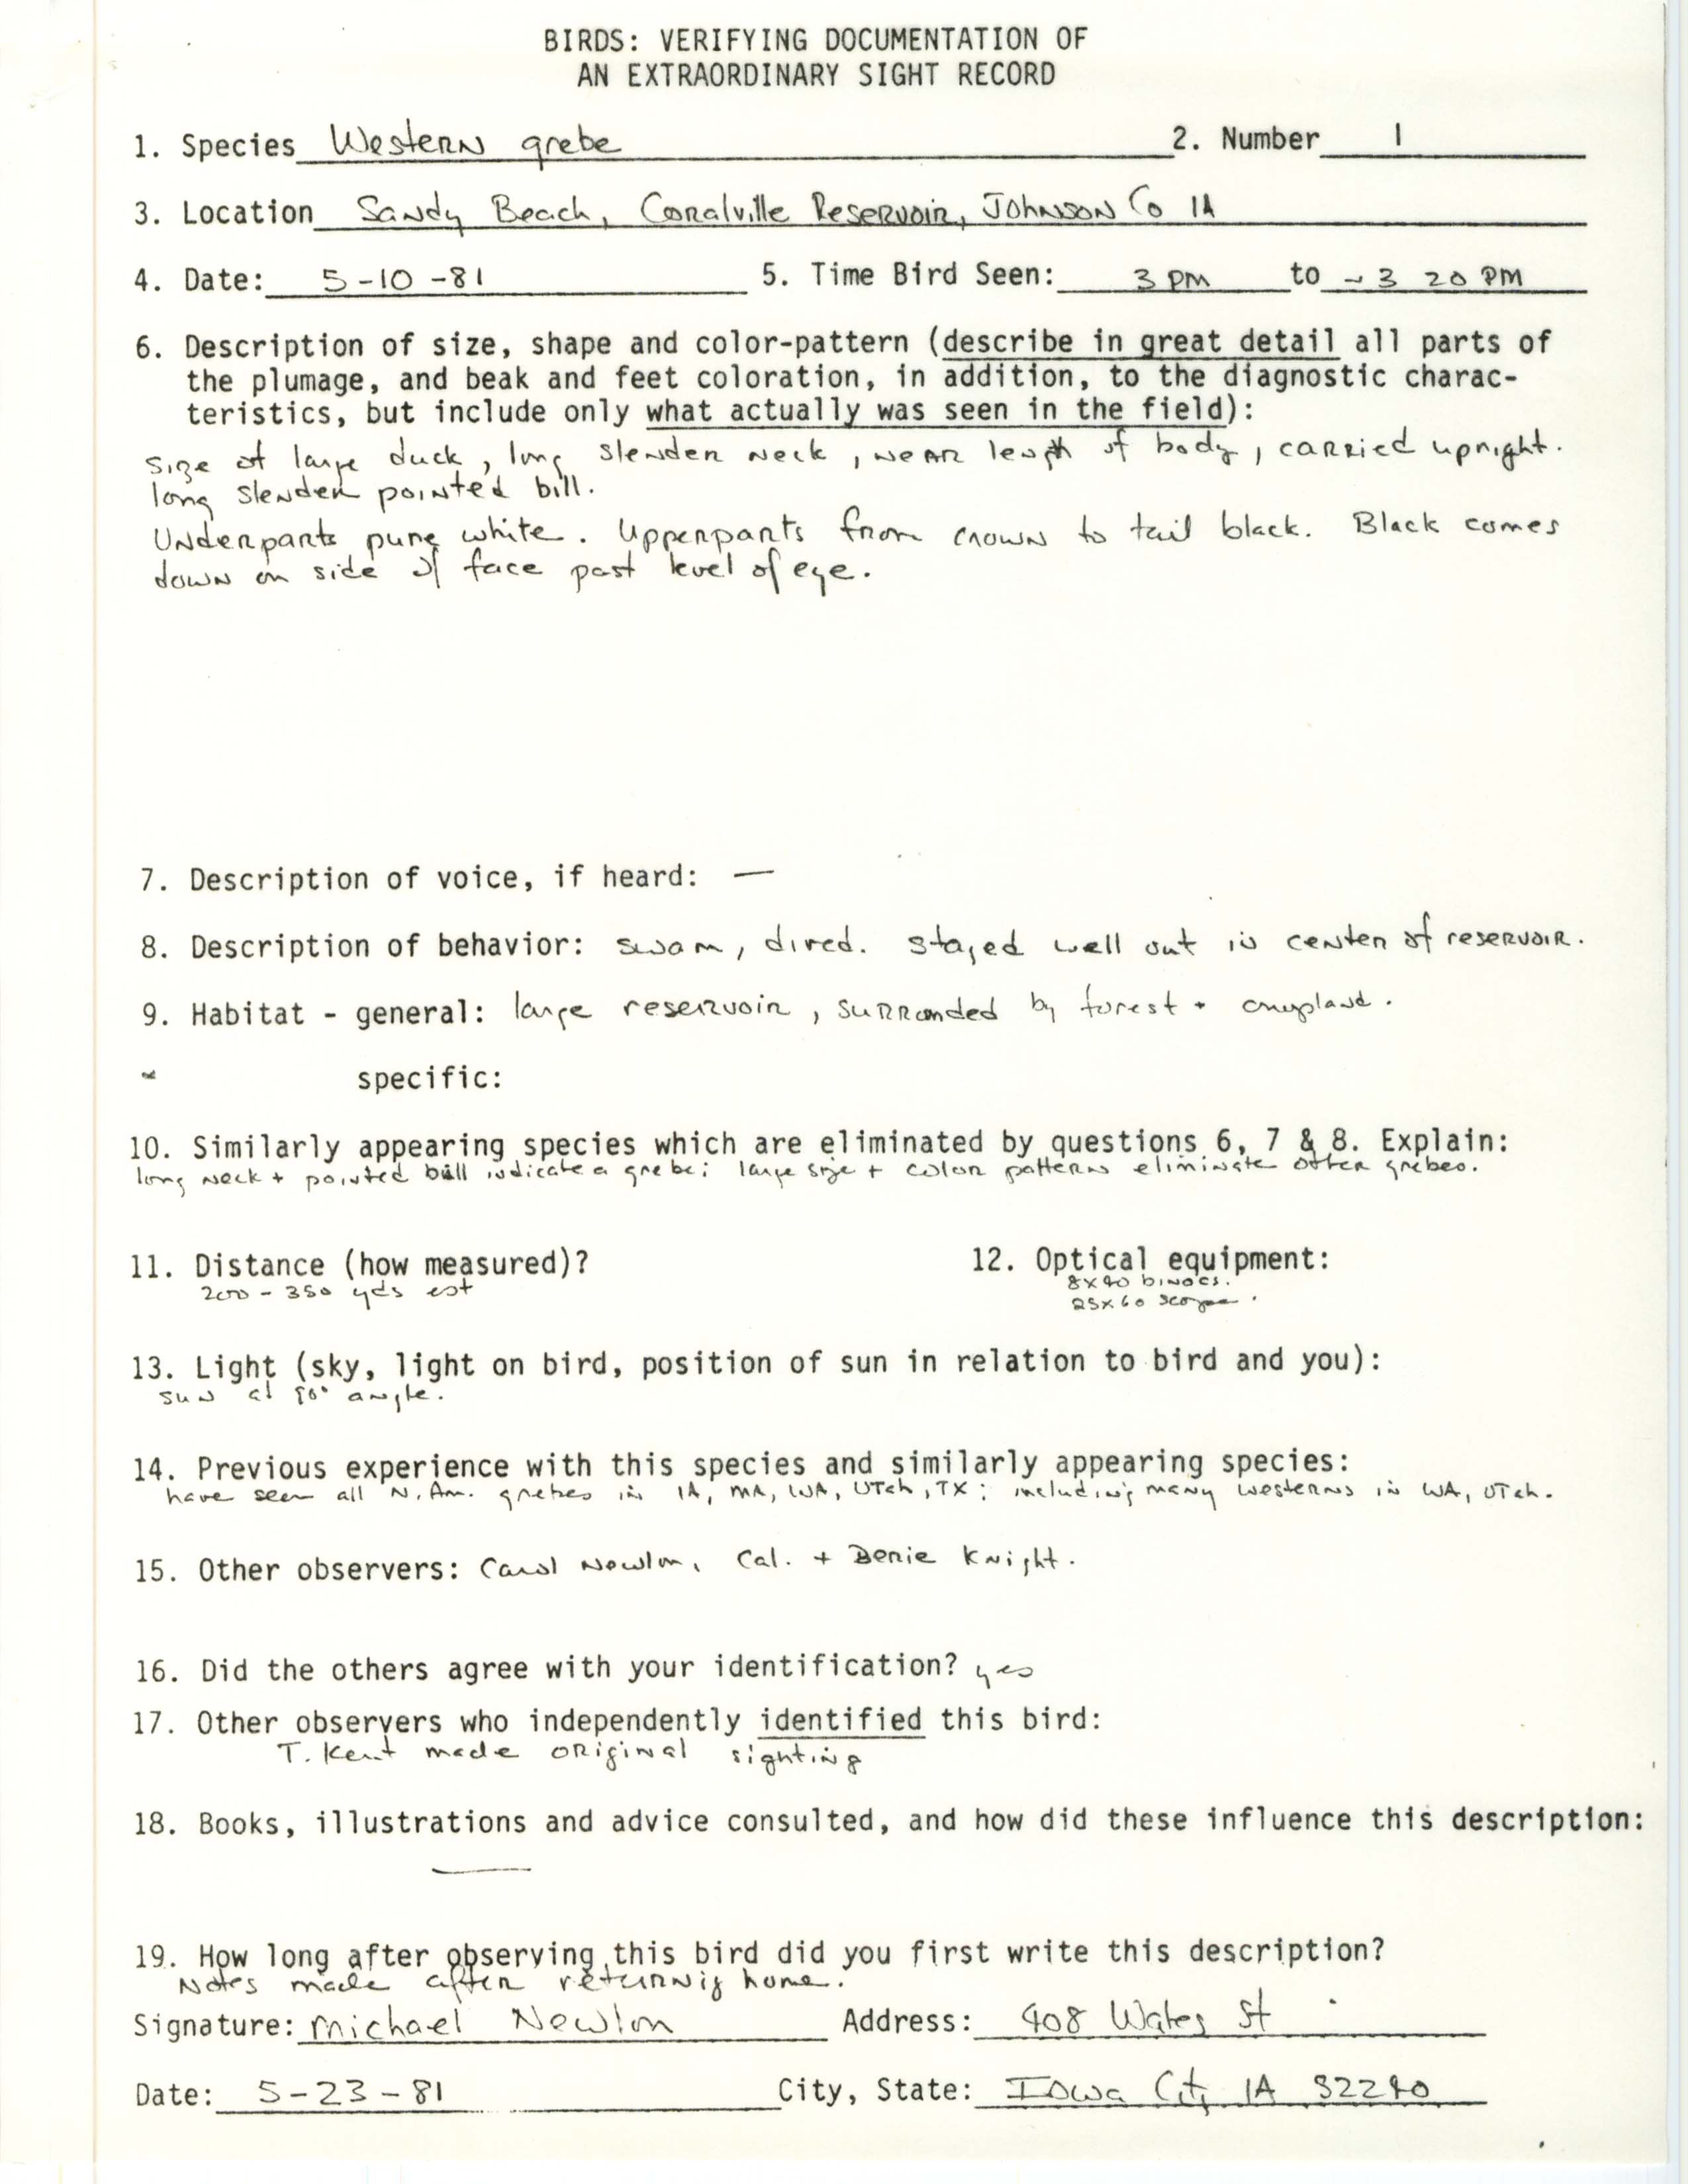 Rare bird documentation form for Western Grebe at Sandy Beach at Coralville Reservoir, 1981